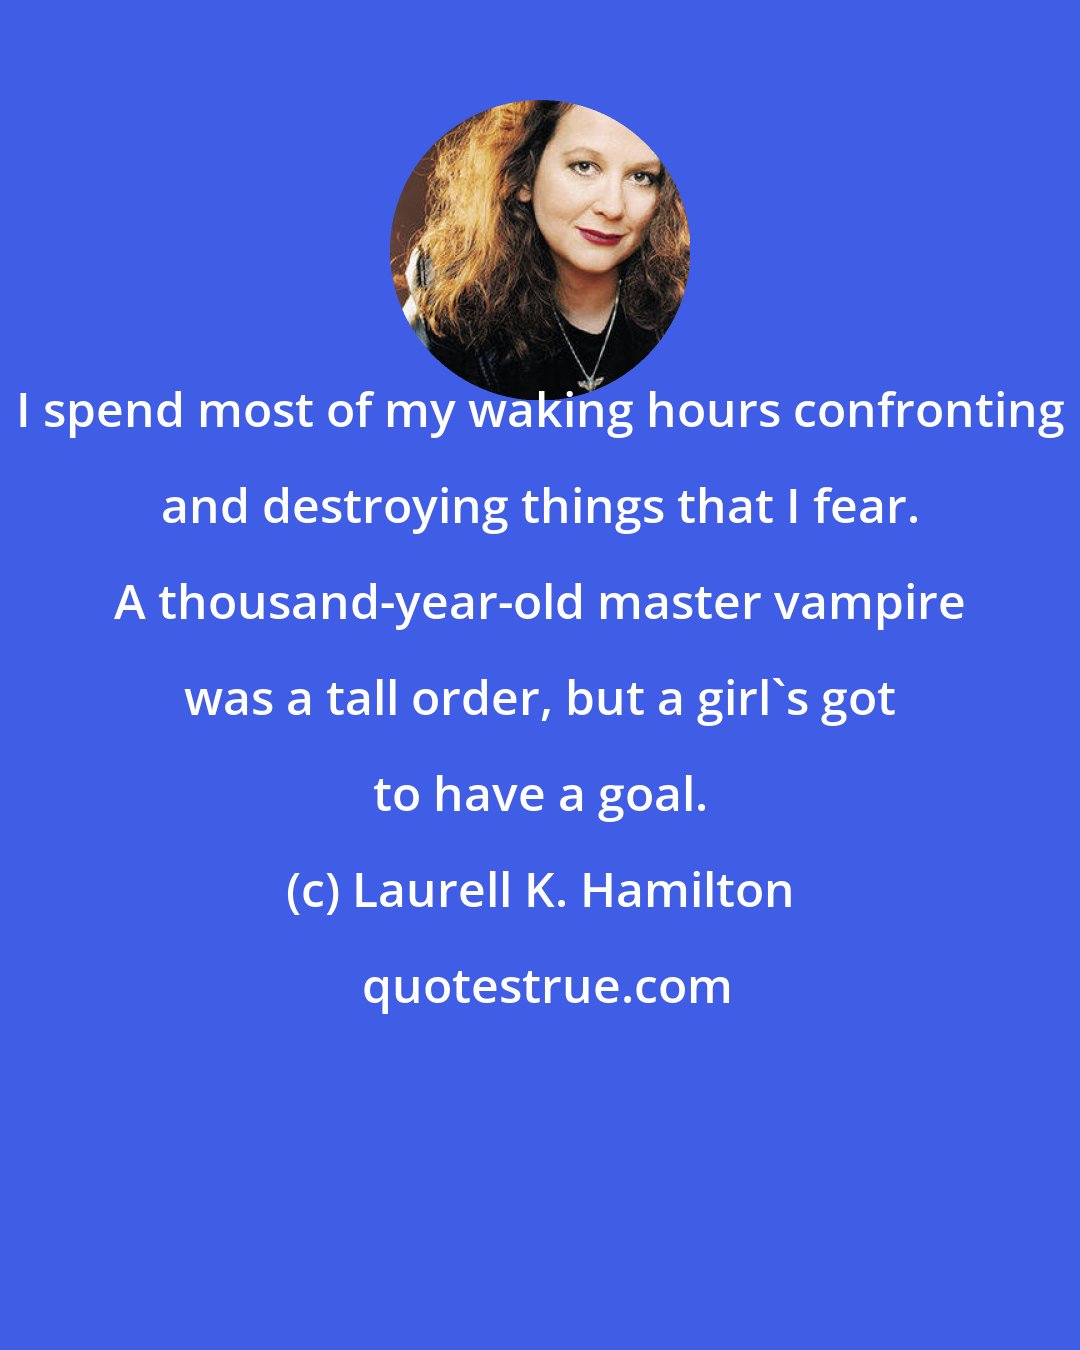 Laurell K. Hamilton: I spend most of my waking hours confronting and destroying things that I fear. A thousand-year-old master vampire was a tall order, but a girl's got to have a goal.